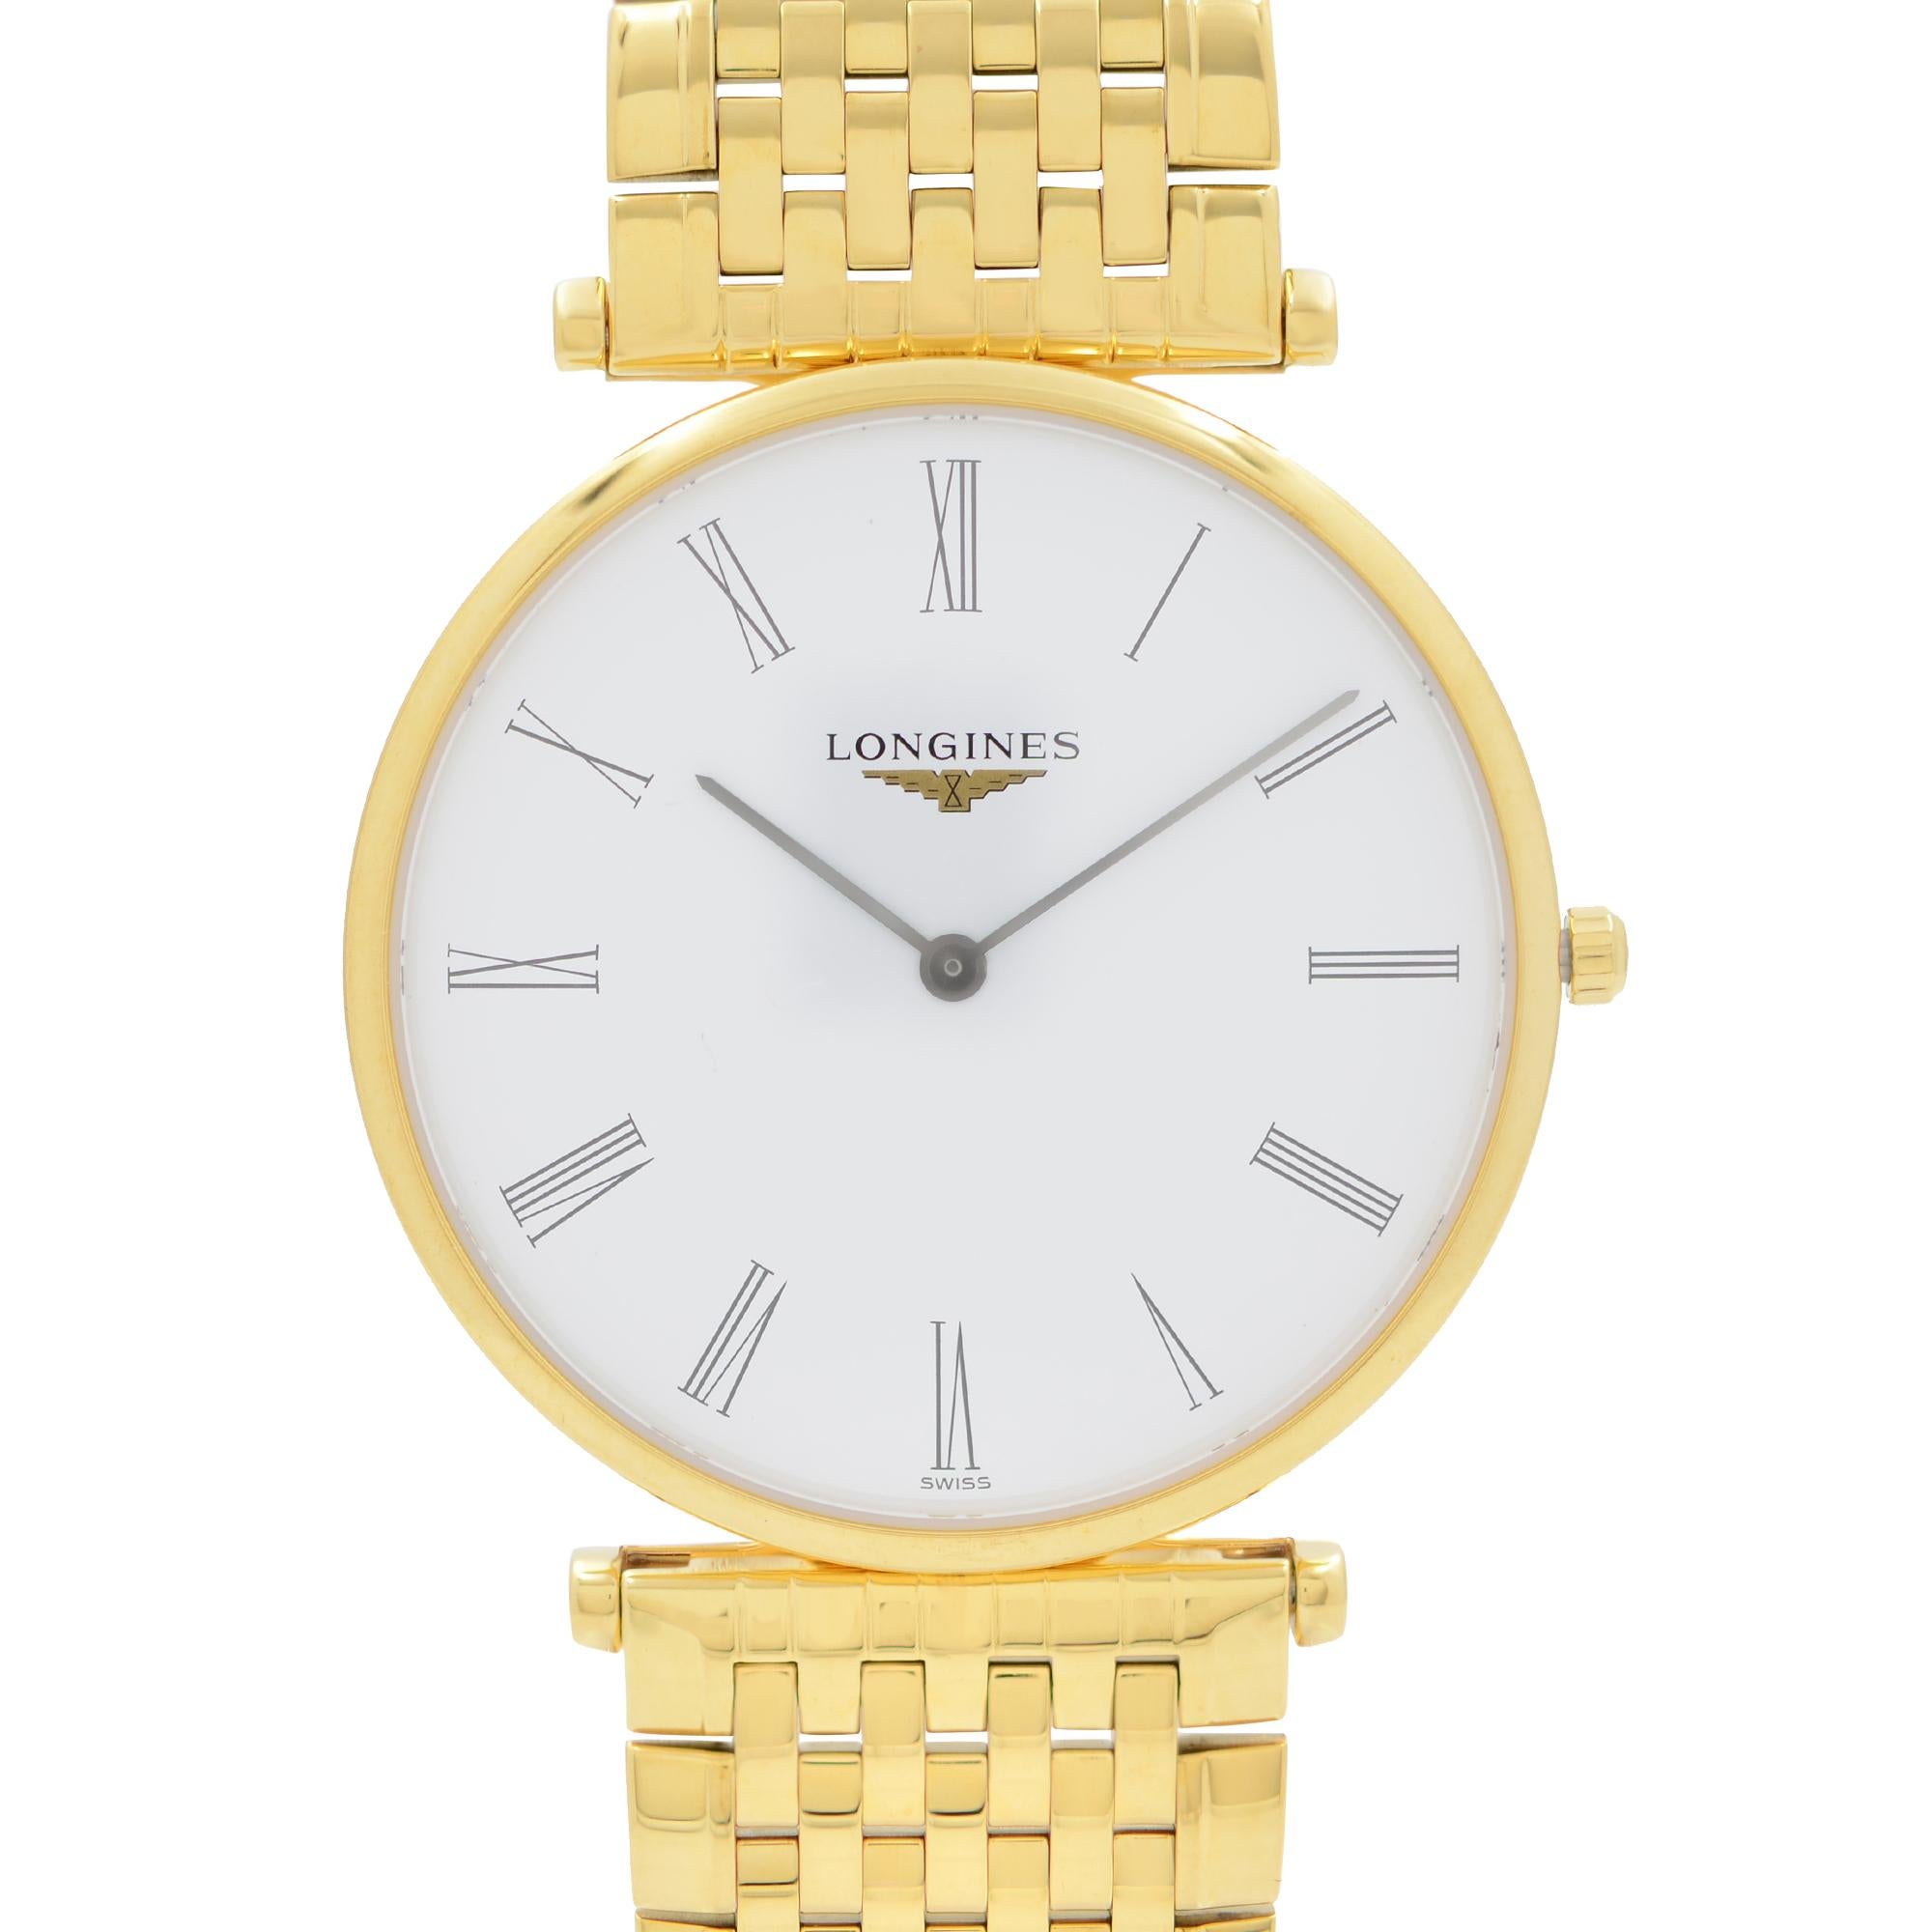 Store Display Model have minor blemishes on the back case. Longines La Grande Classique Gold-Tone White Roman Dial Men's Quartz Watch L4.755.2.11.8. This Beautiful Timepiece is Powered by Quartz (Battery) Movement and Features: Round Yellow Gold PVD